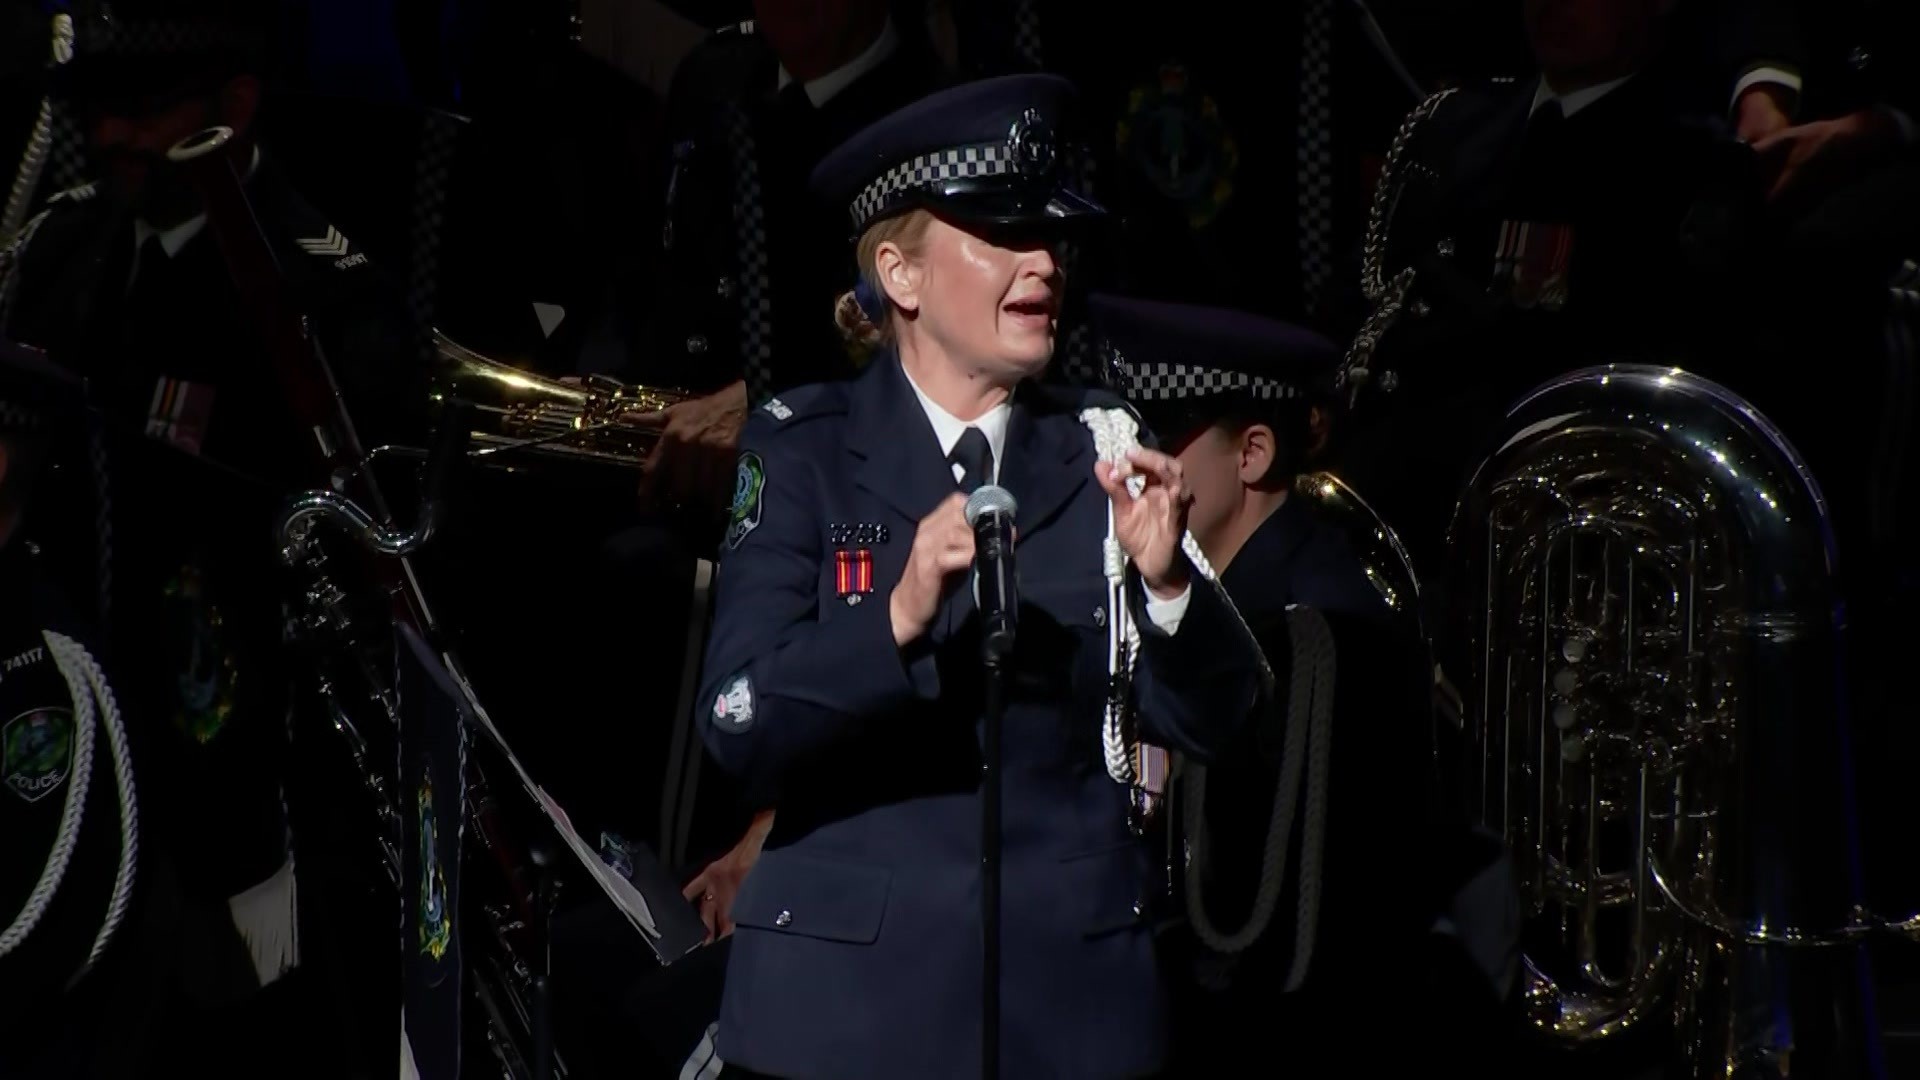 A female police officer sings Amazing Grace on stage at a funeral